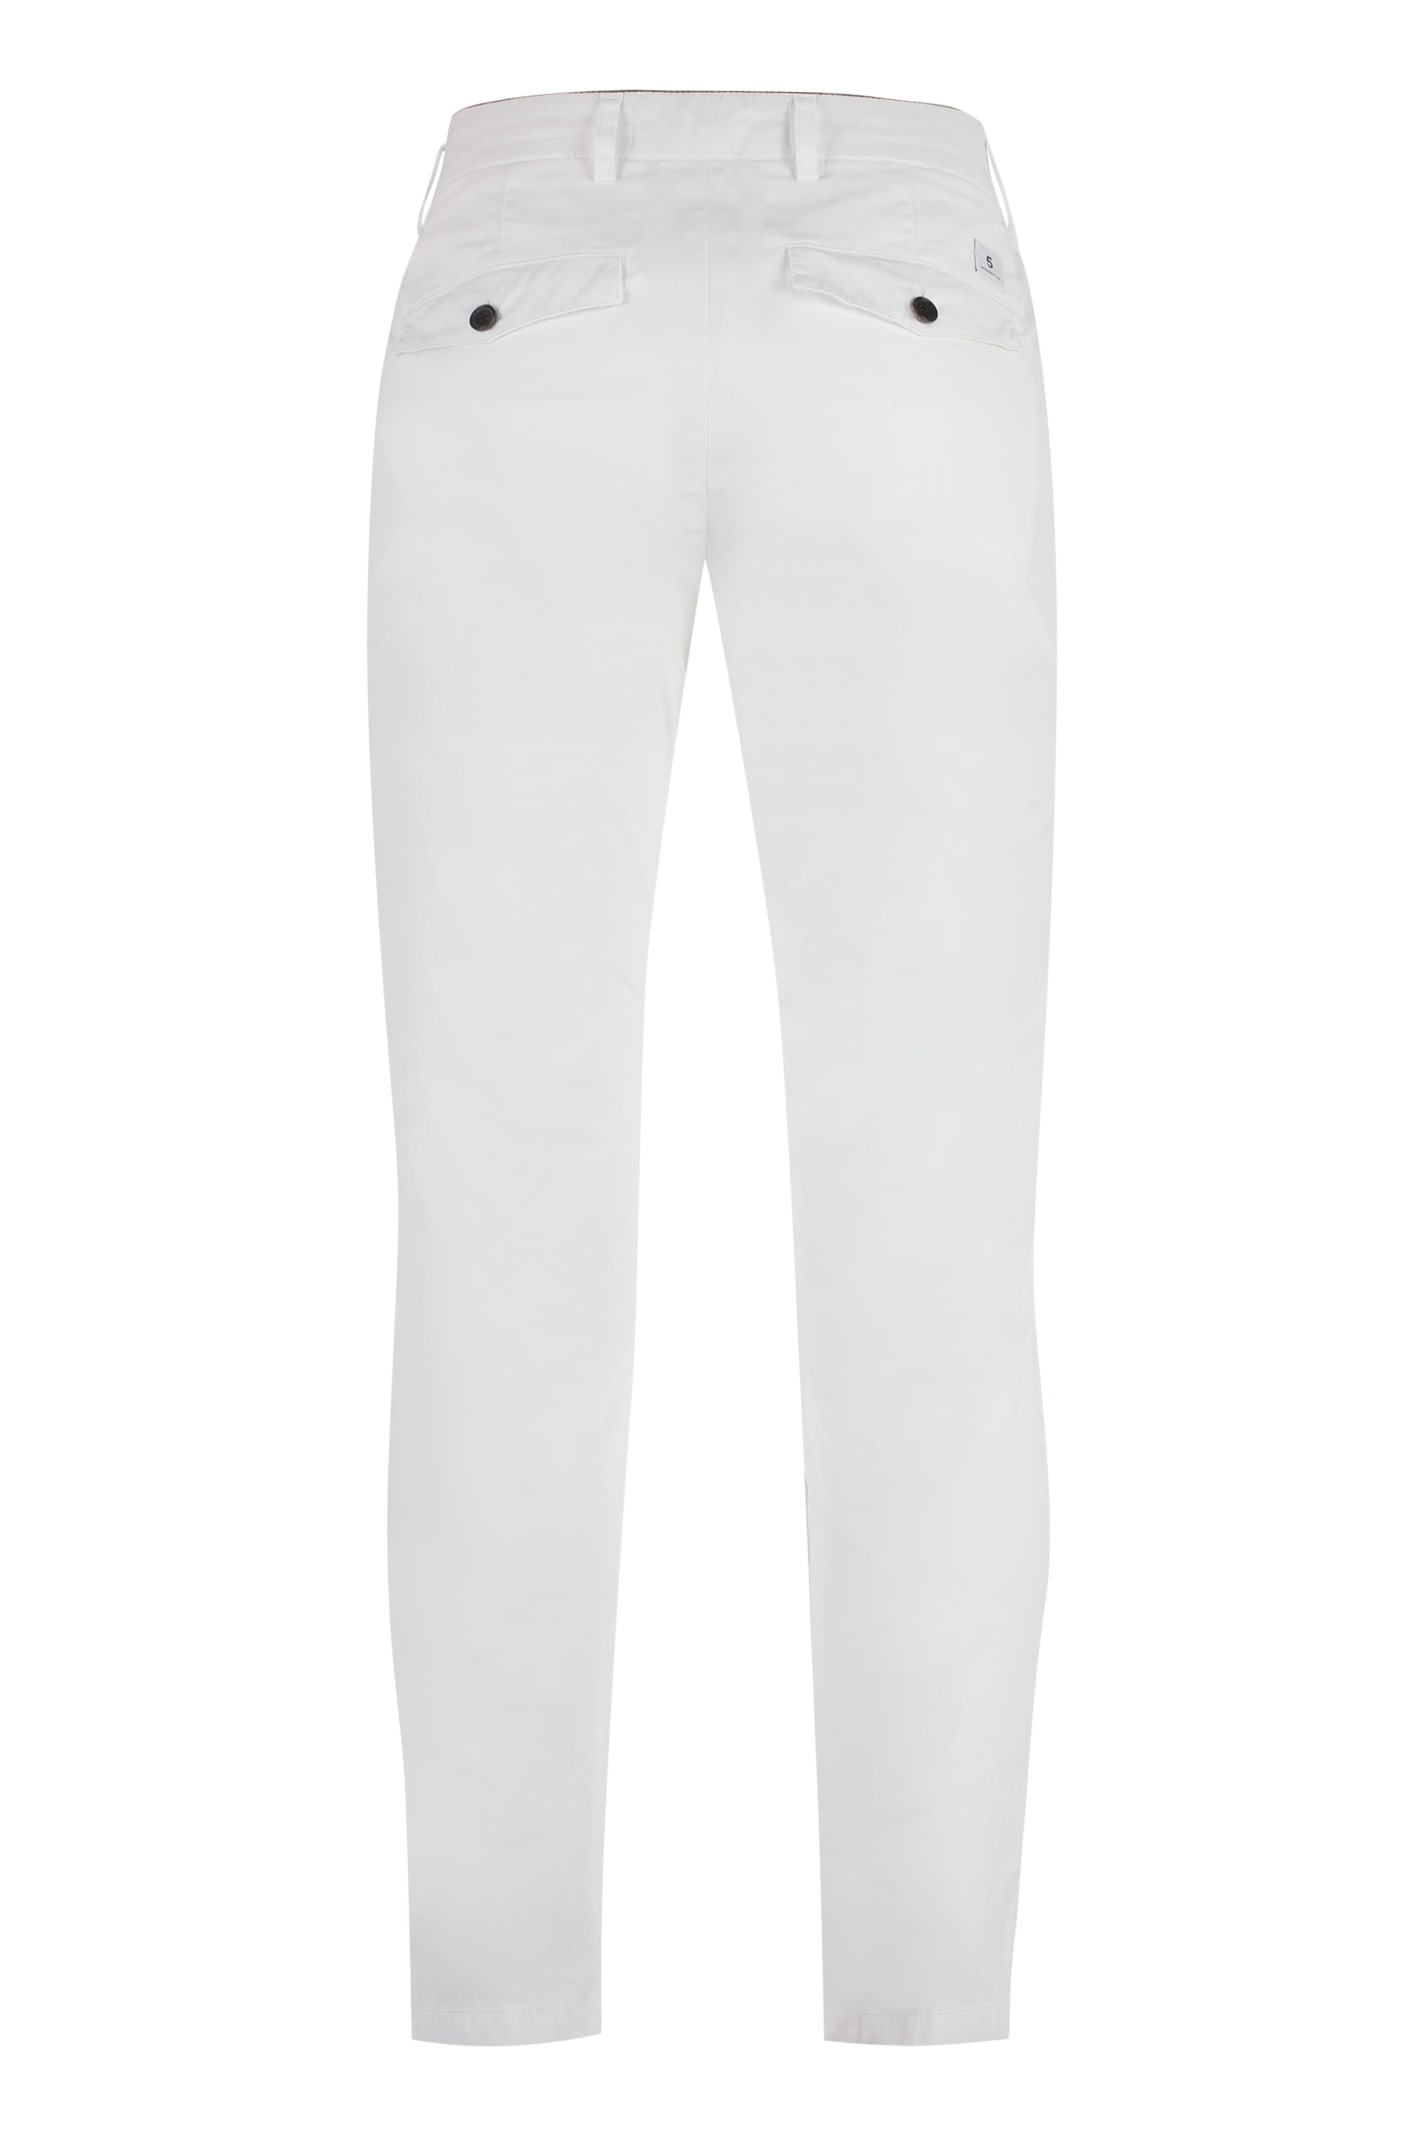 Shop Department Five Prince Chino Pants In White